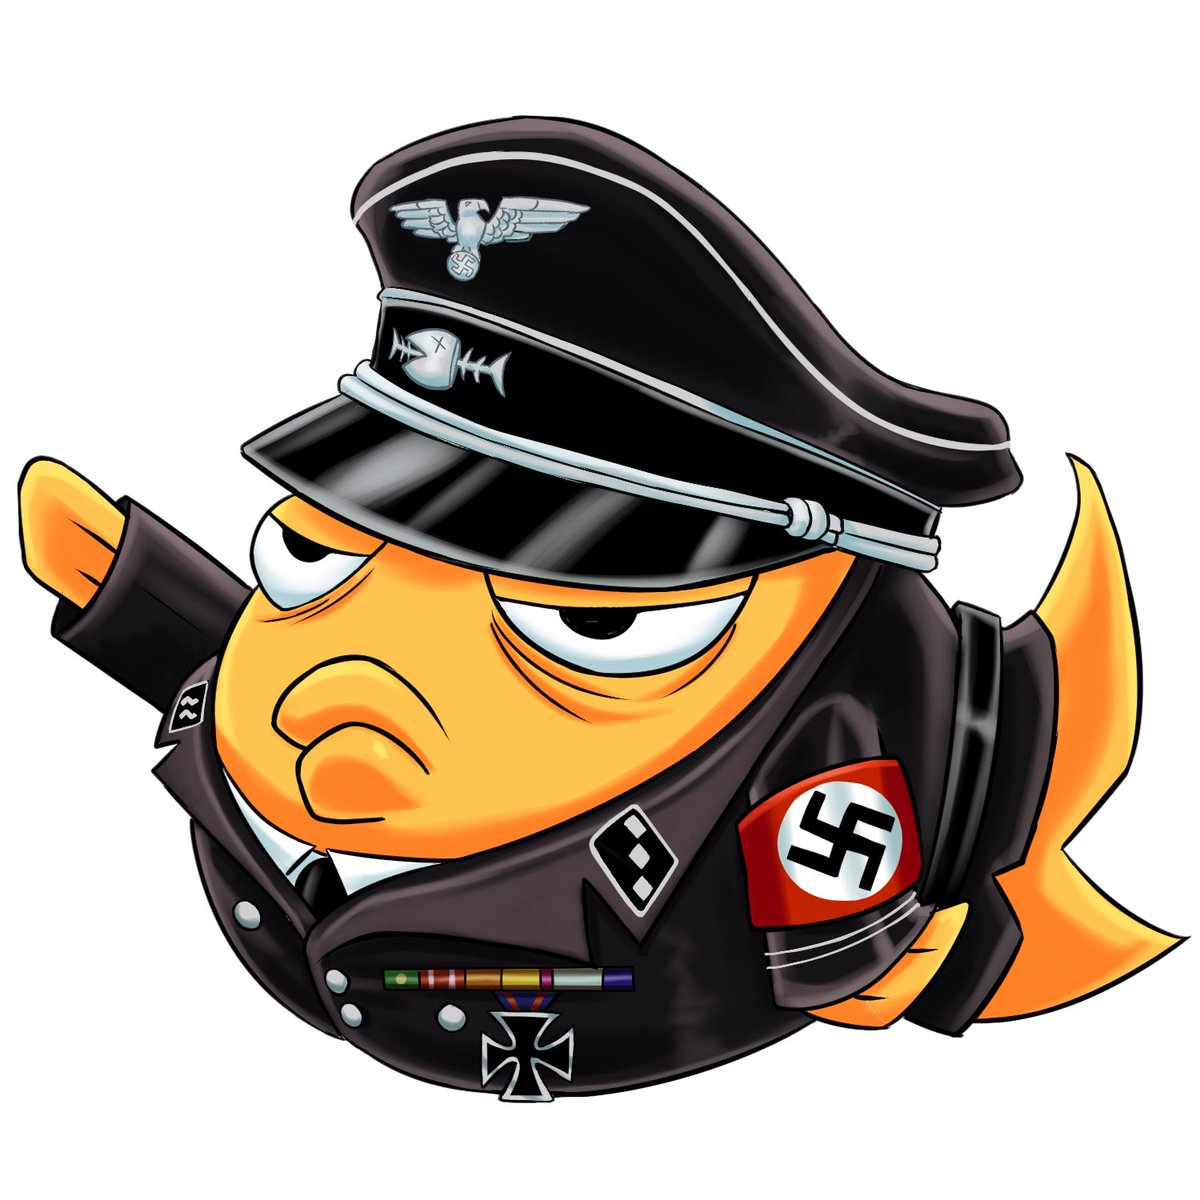 Ya make one Joke about chatfish as Schnazifish... It reminds me of the joke of Celest being a Warcriminal.

I've taken to calling chatfish Bjukit Bitchies from now on.